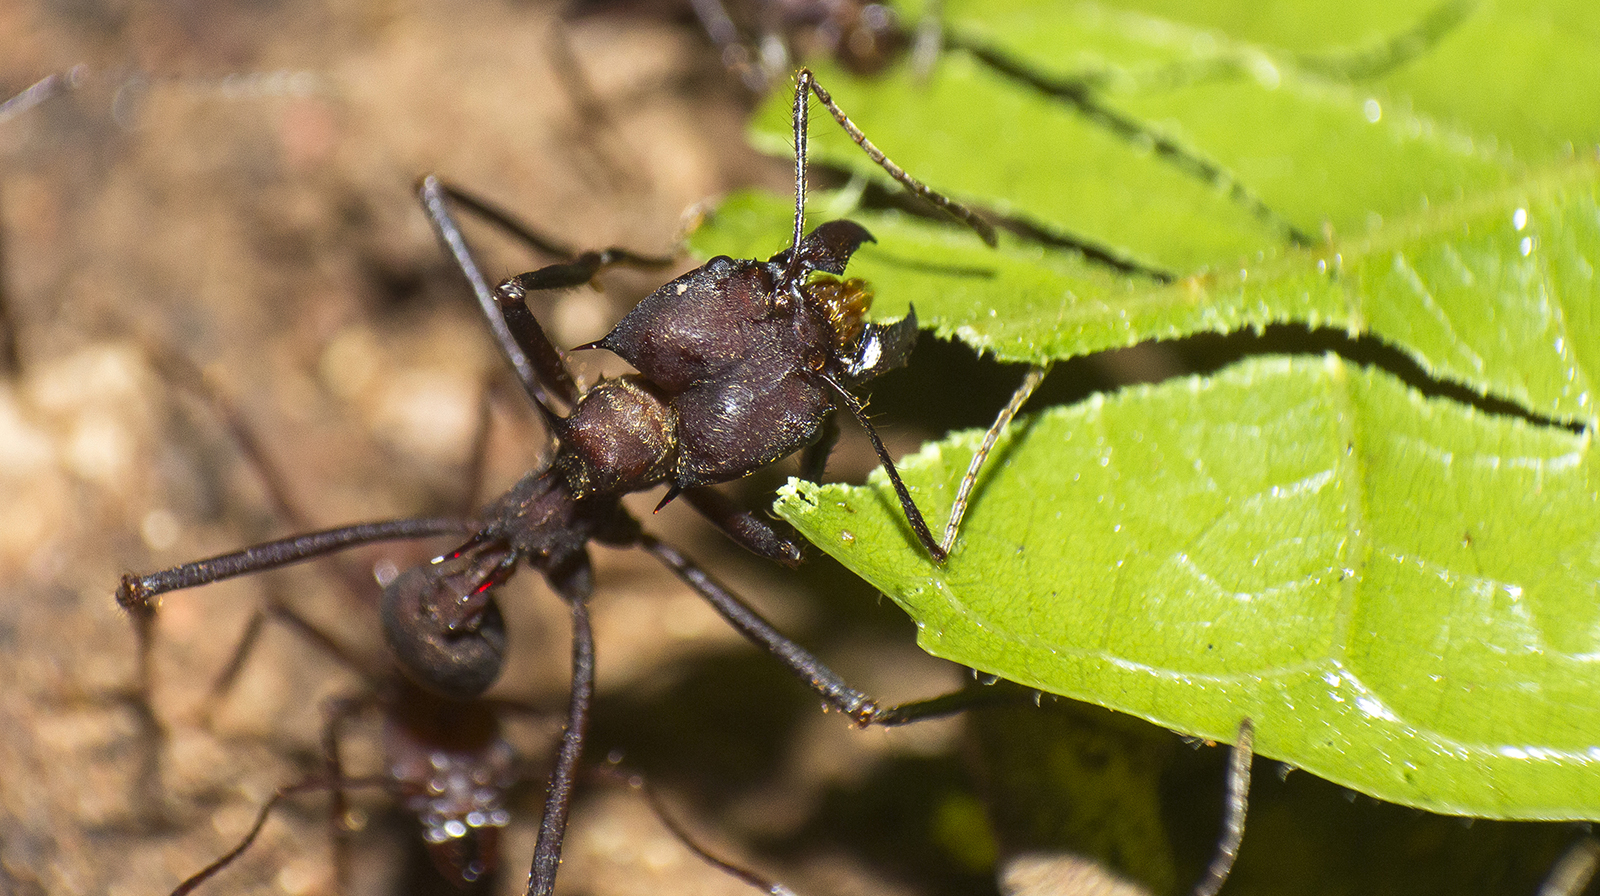 Leaf-cutter ant at work